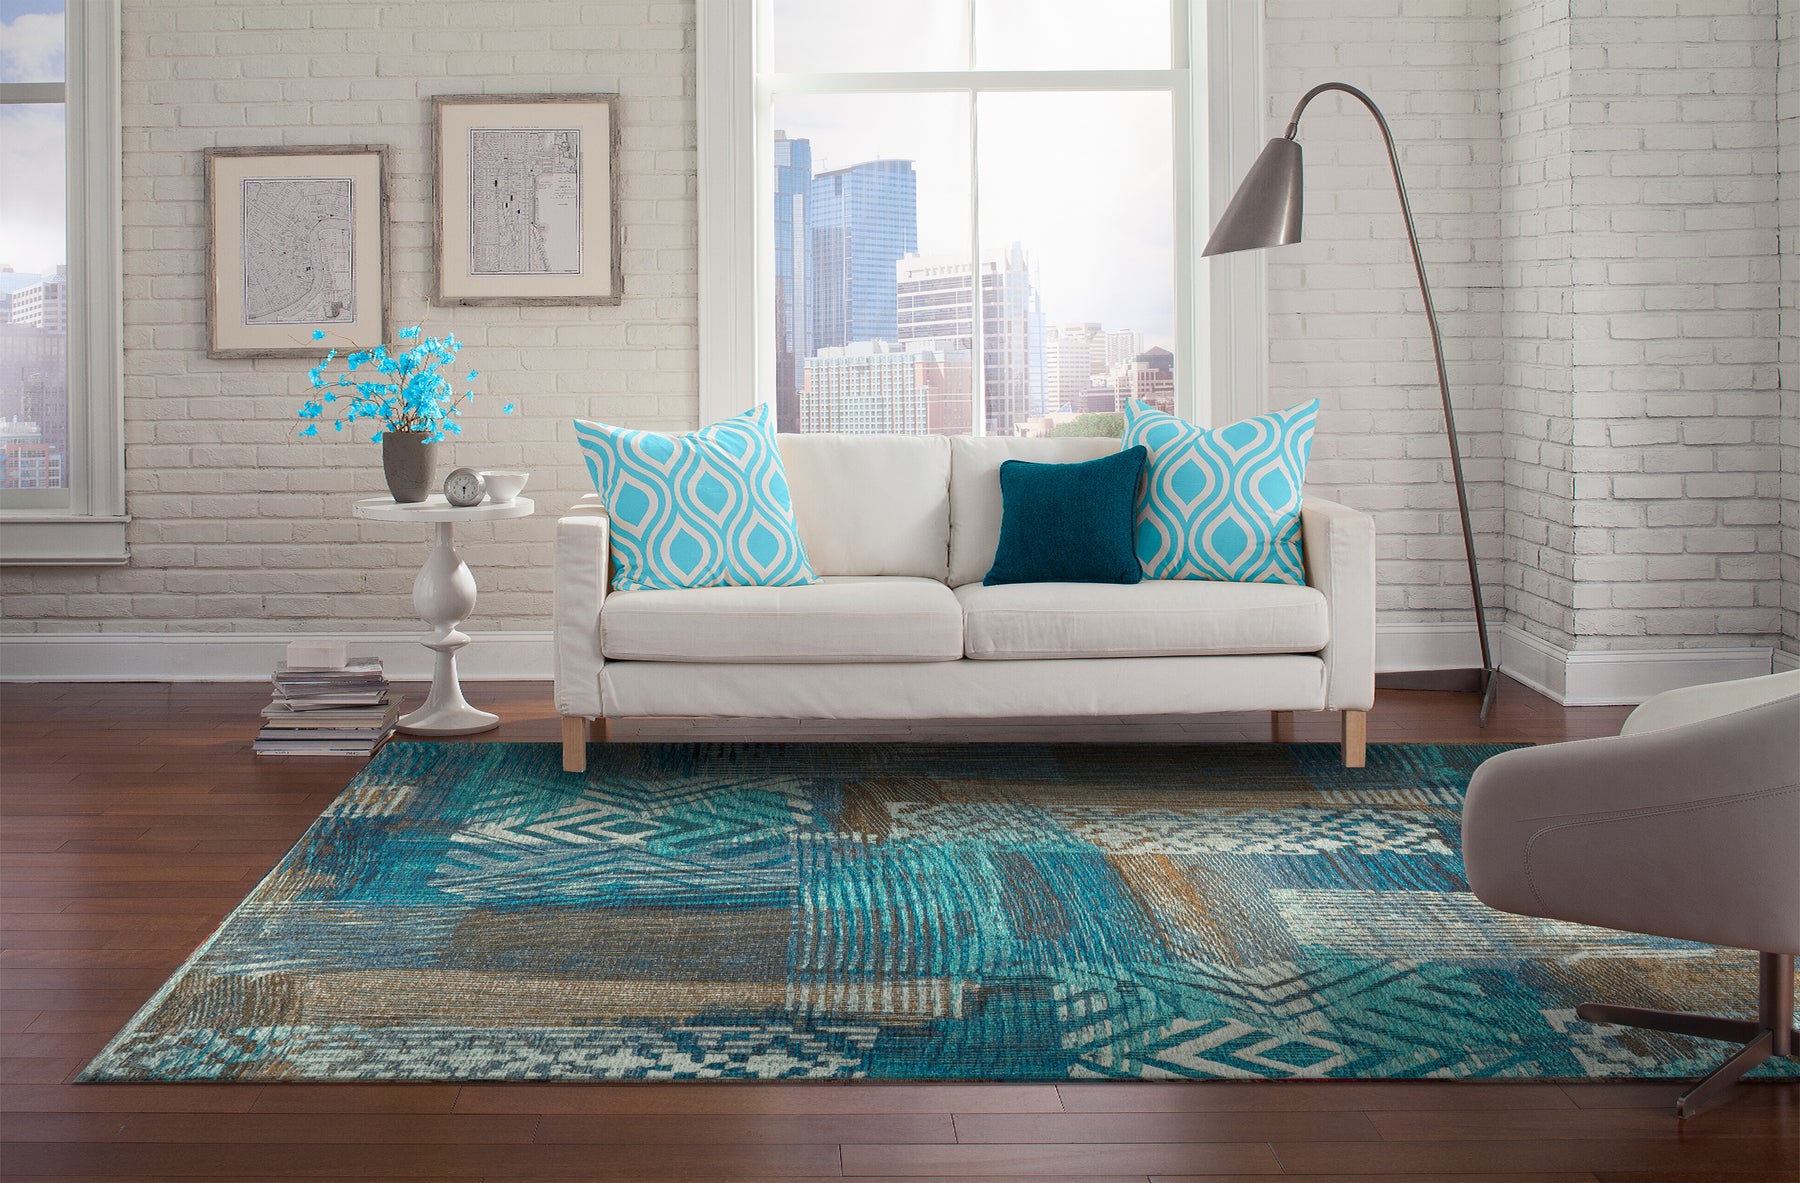 7 Area Rug Rules for a Designer Look